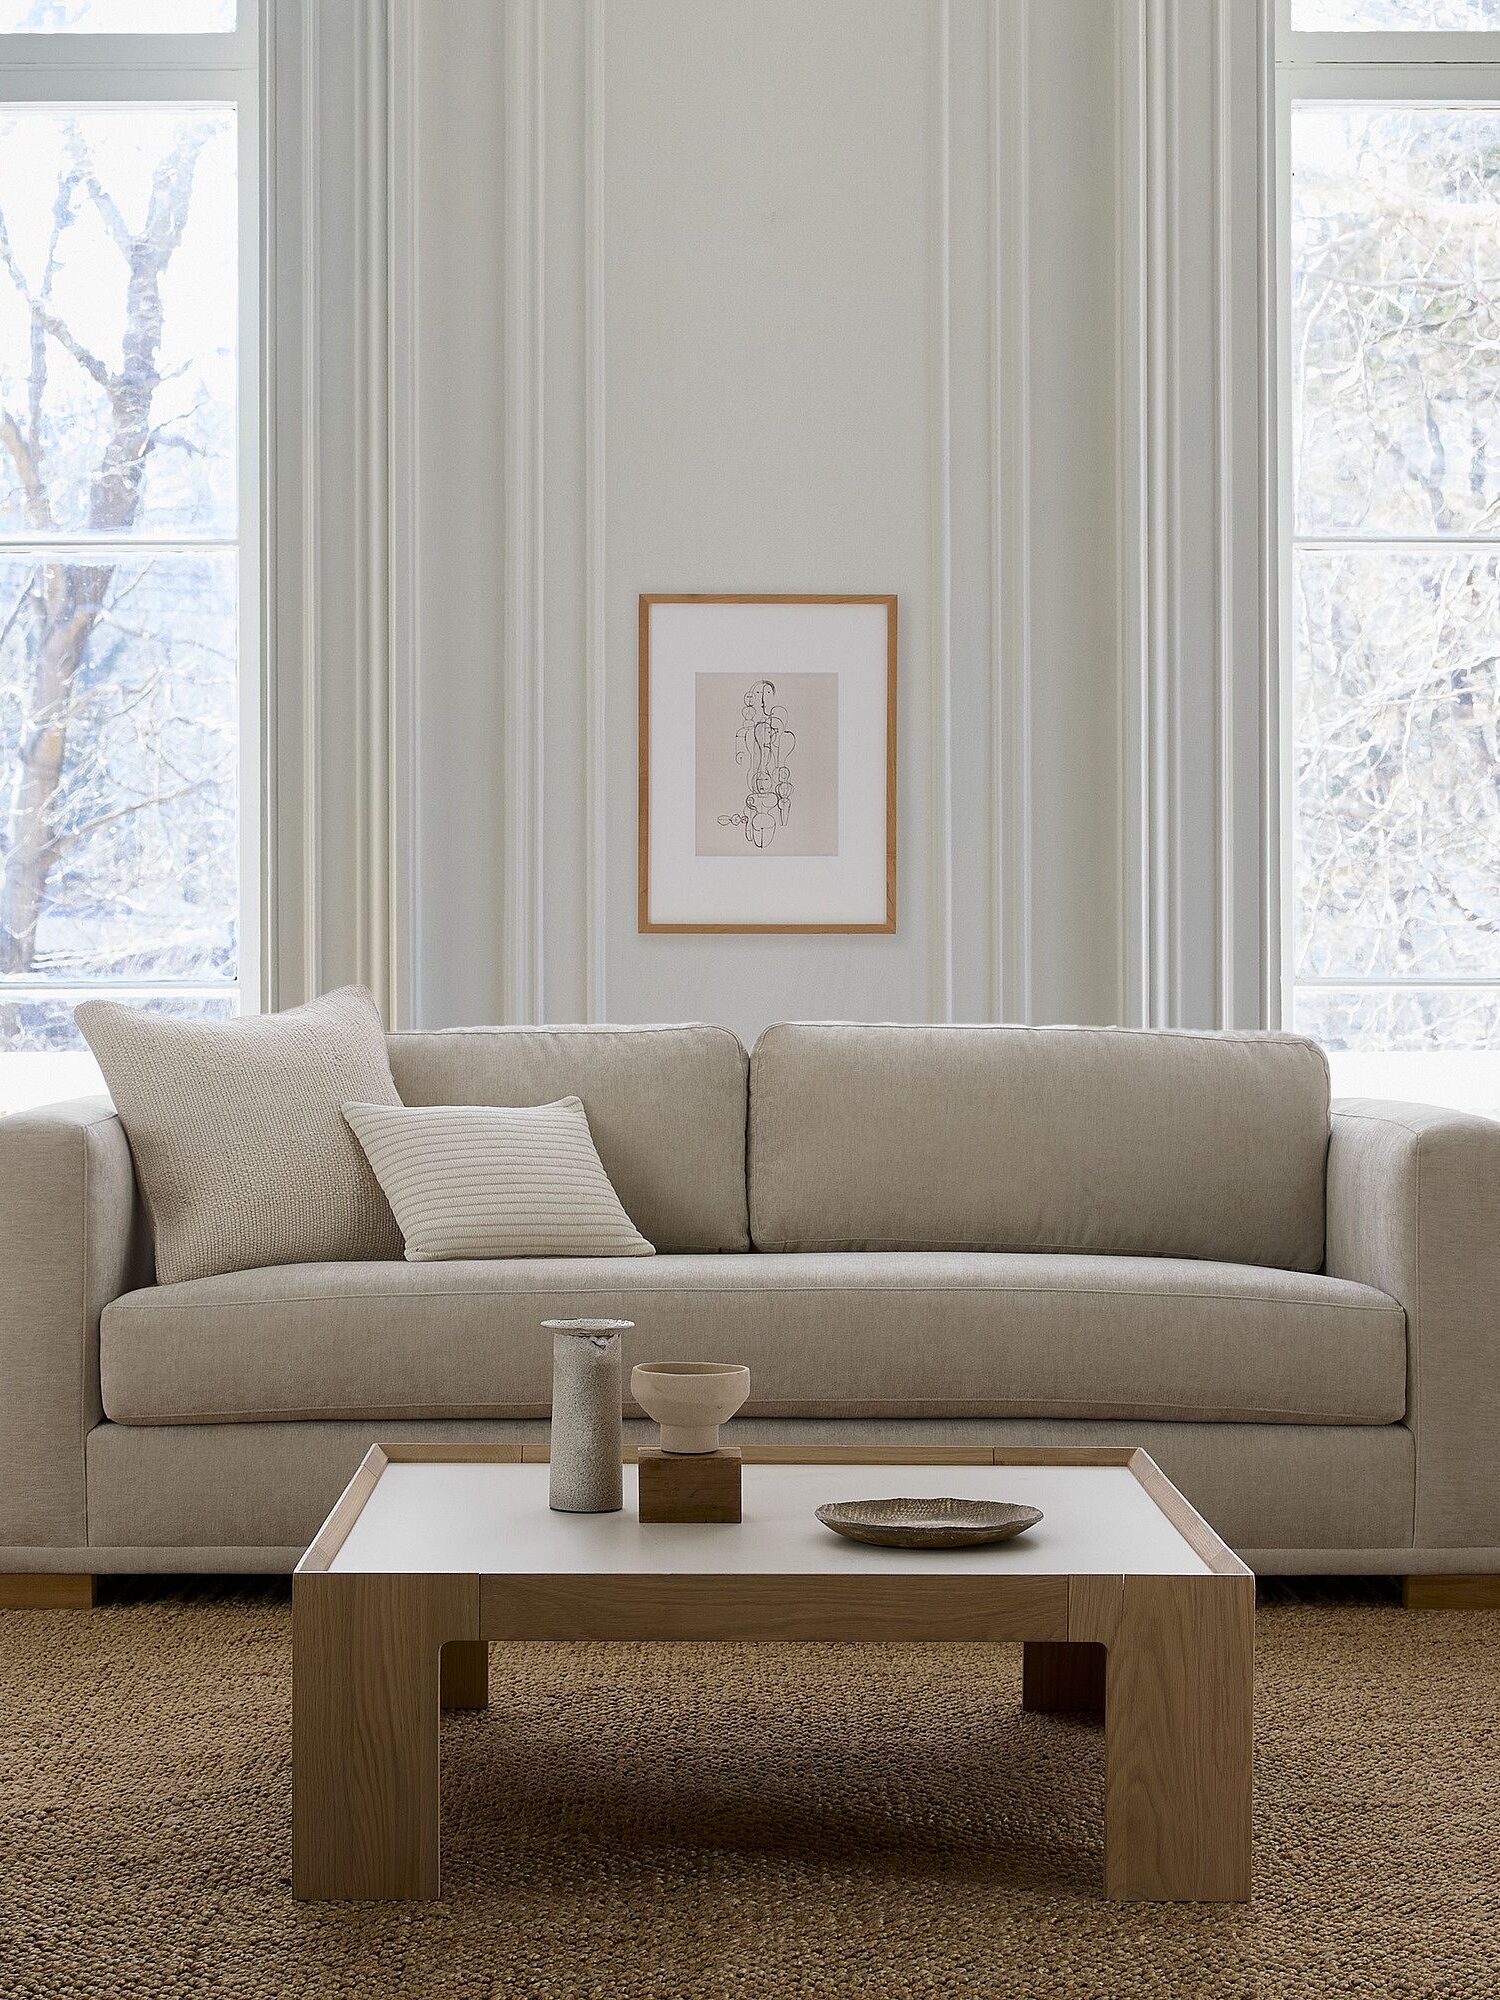 A minimalist living room features a beige sofa with white pillows, a wooden coffee table with decor, and large windows showcasing a snowy outdoor view.